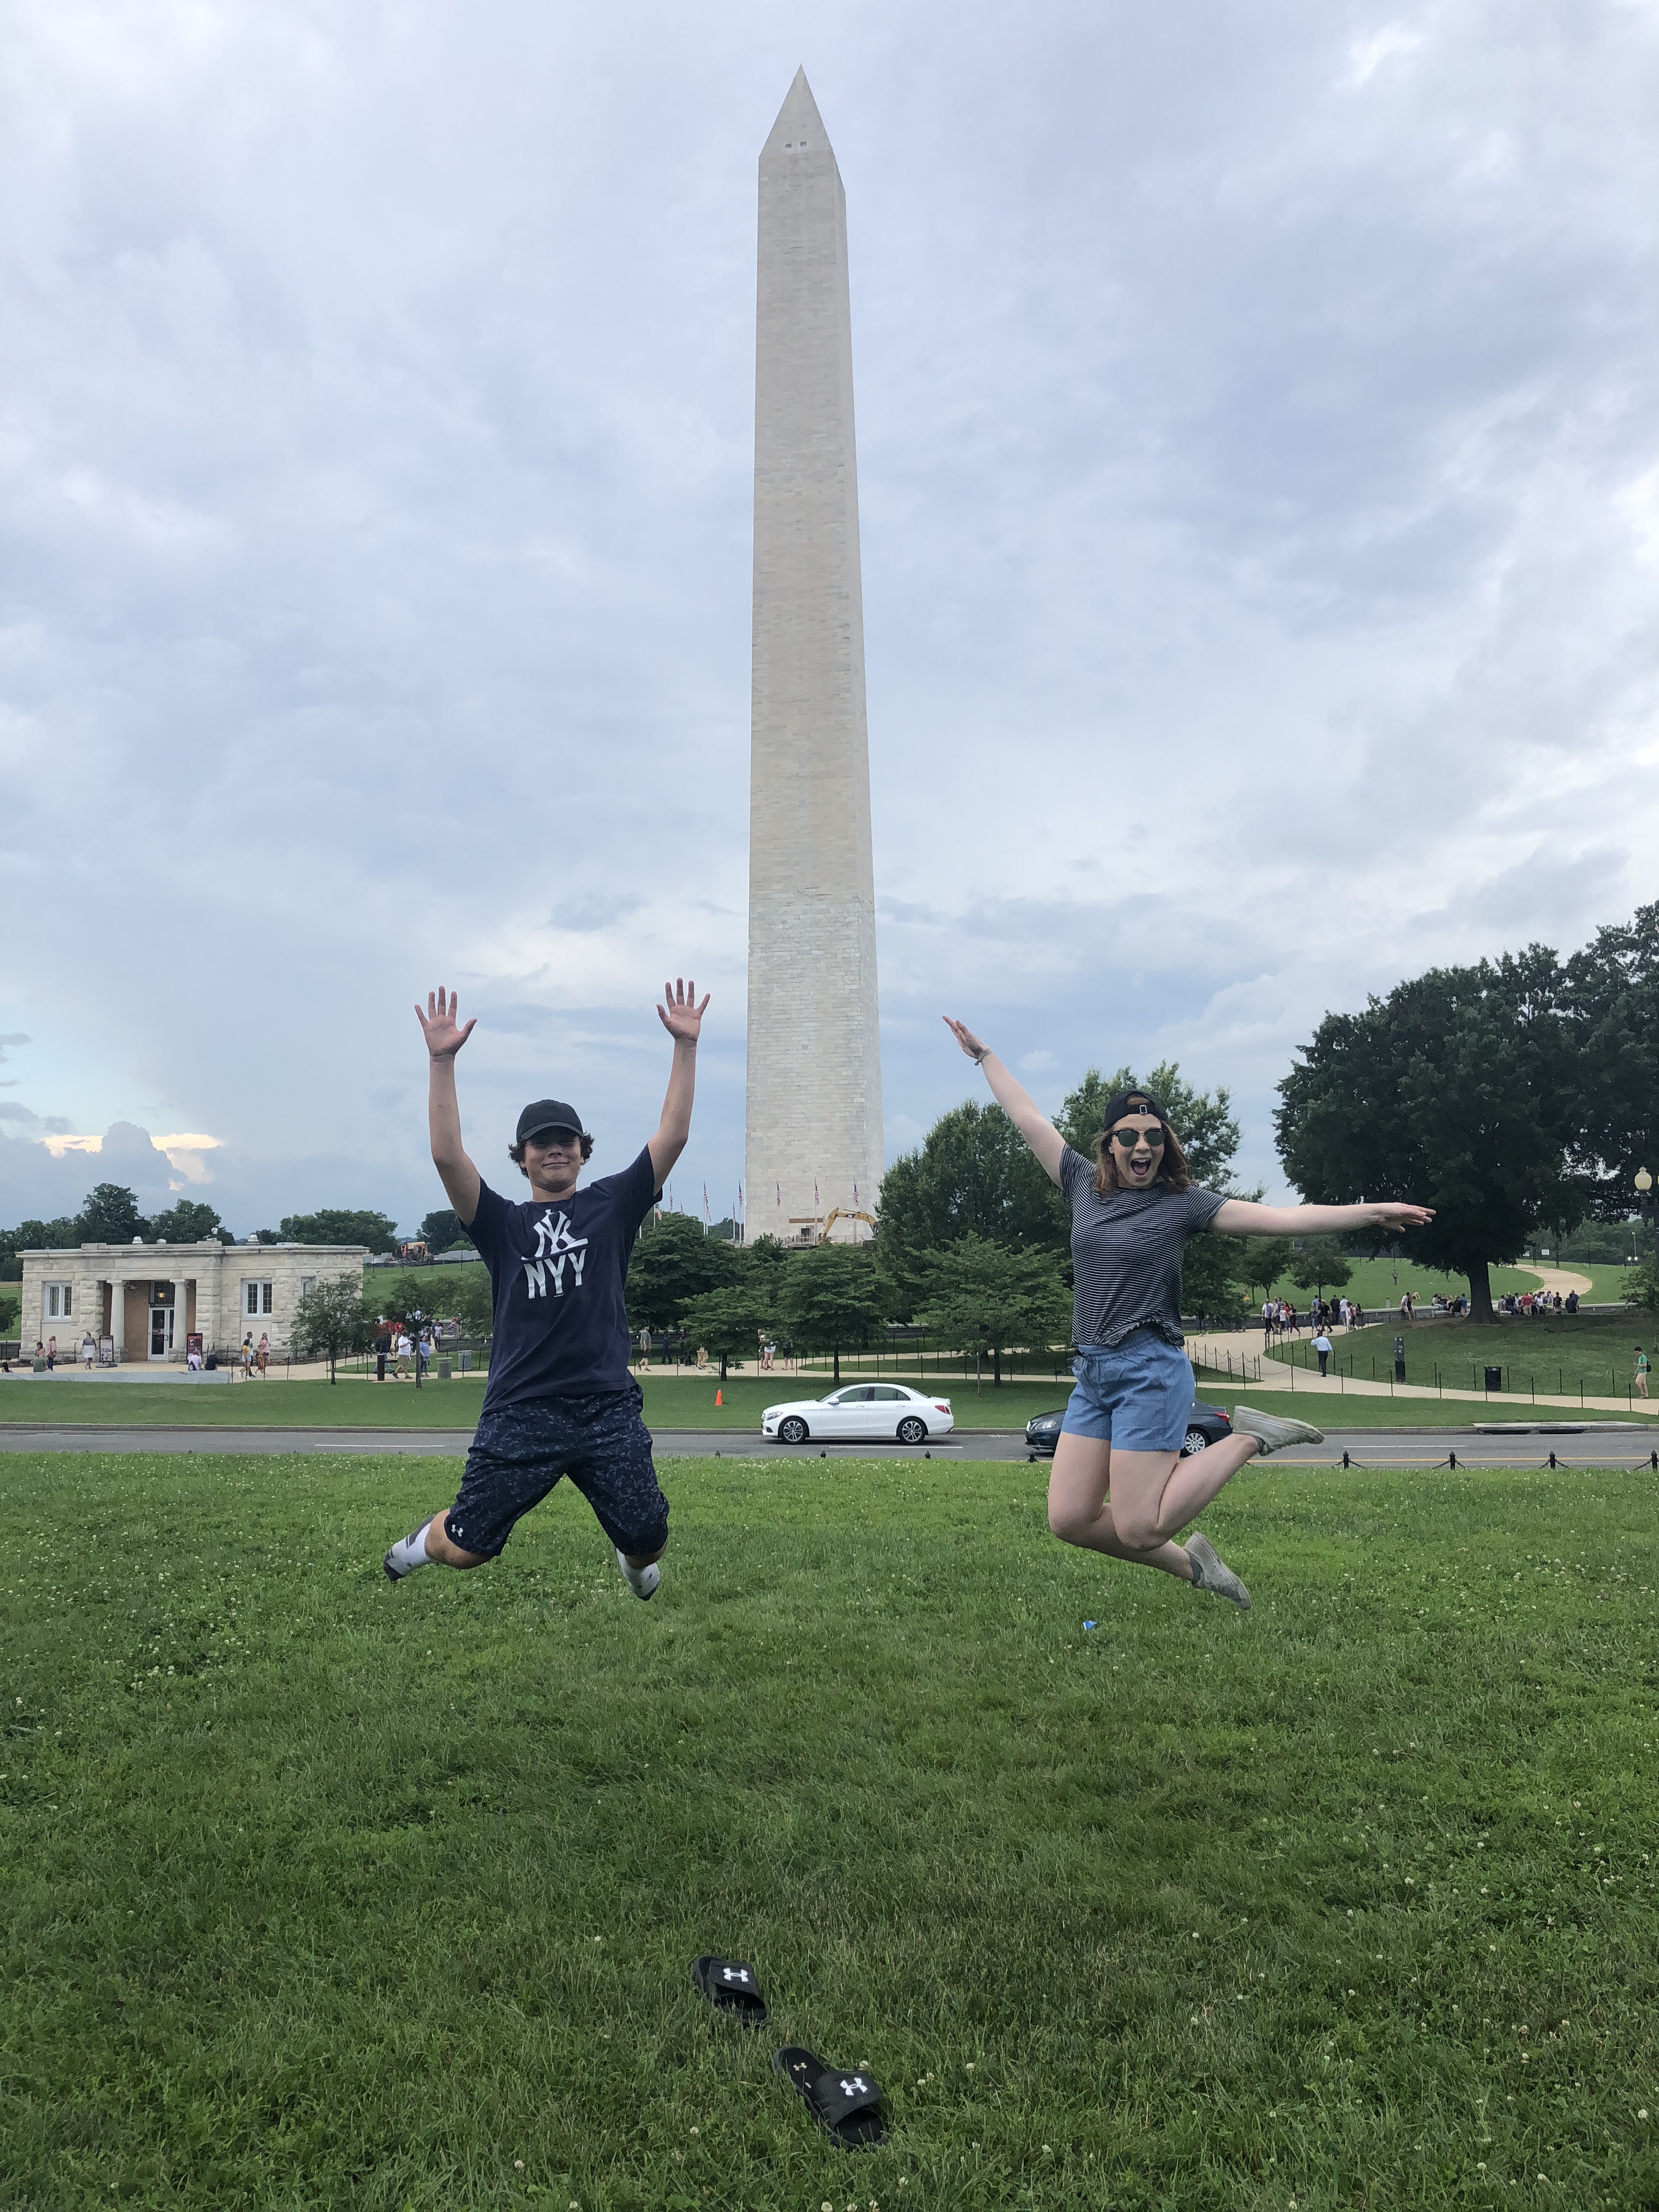 Two people jumping for joy in front of Washington Monument, D.C.